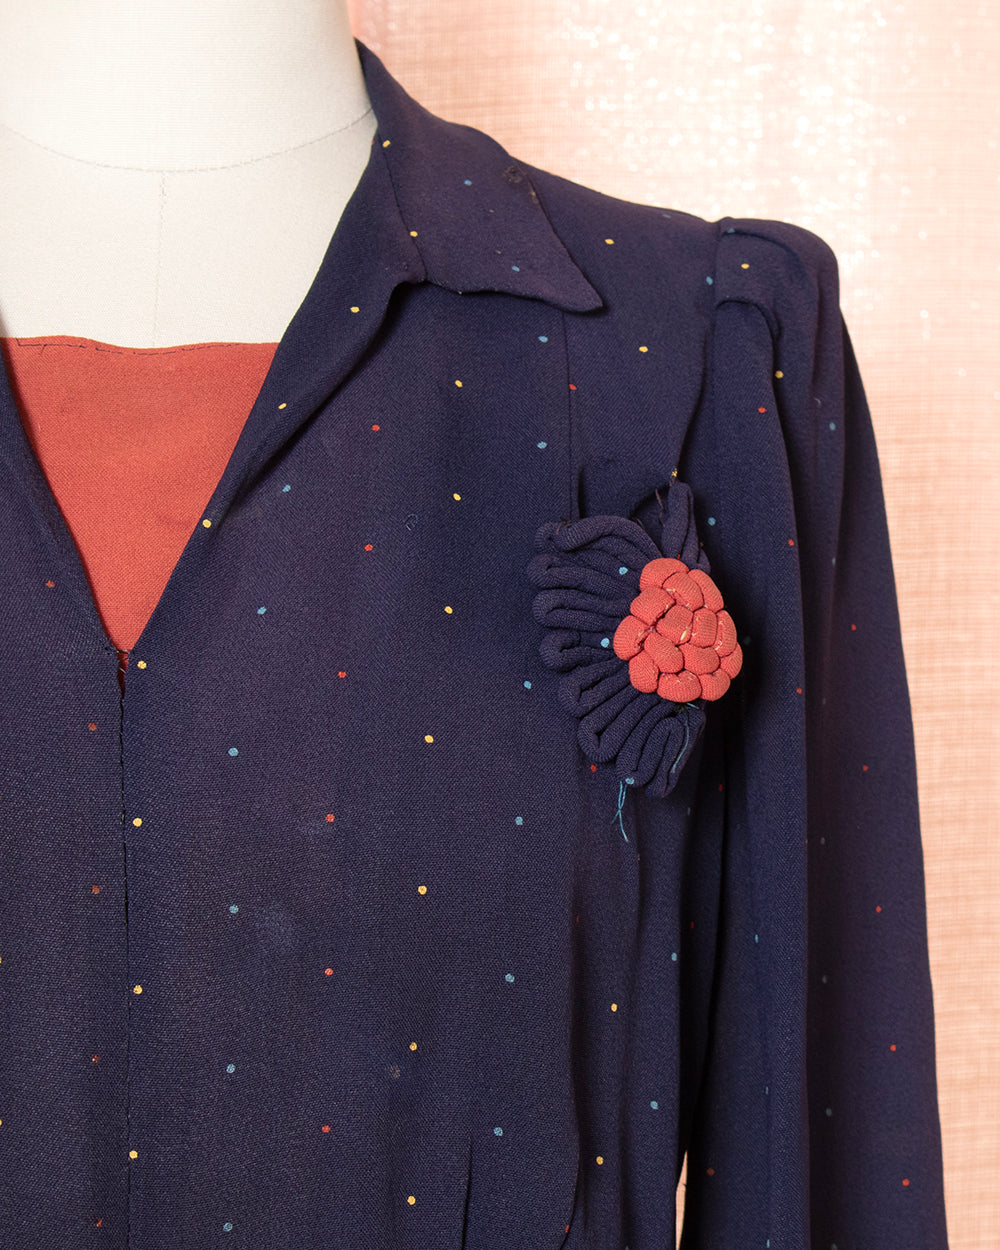 [AS-IS] 1940s Polka Dot Navy Blue Rayon Dress | small